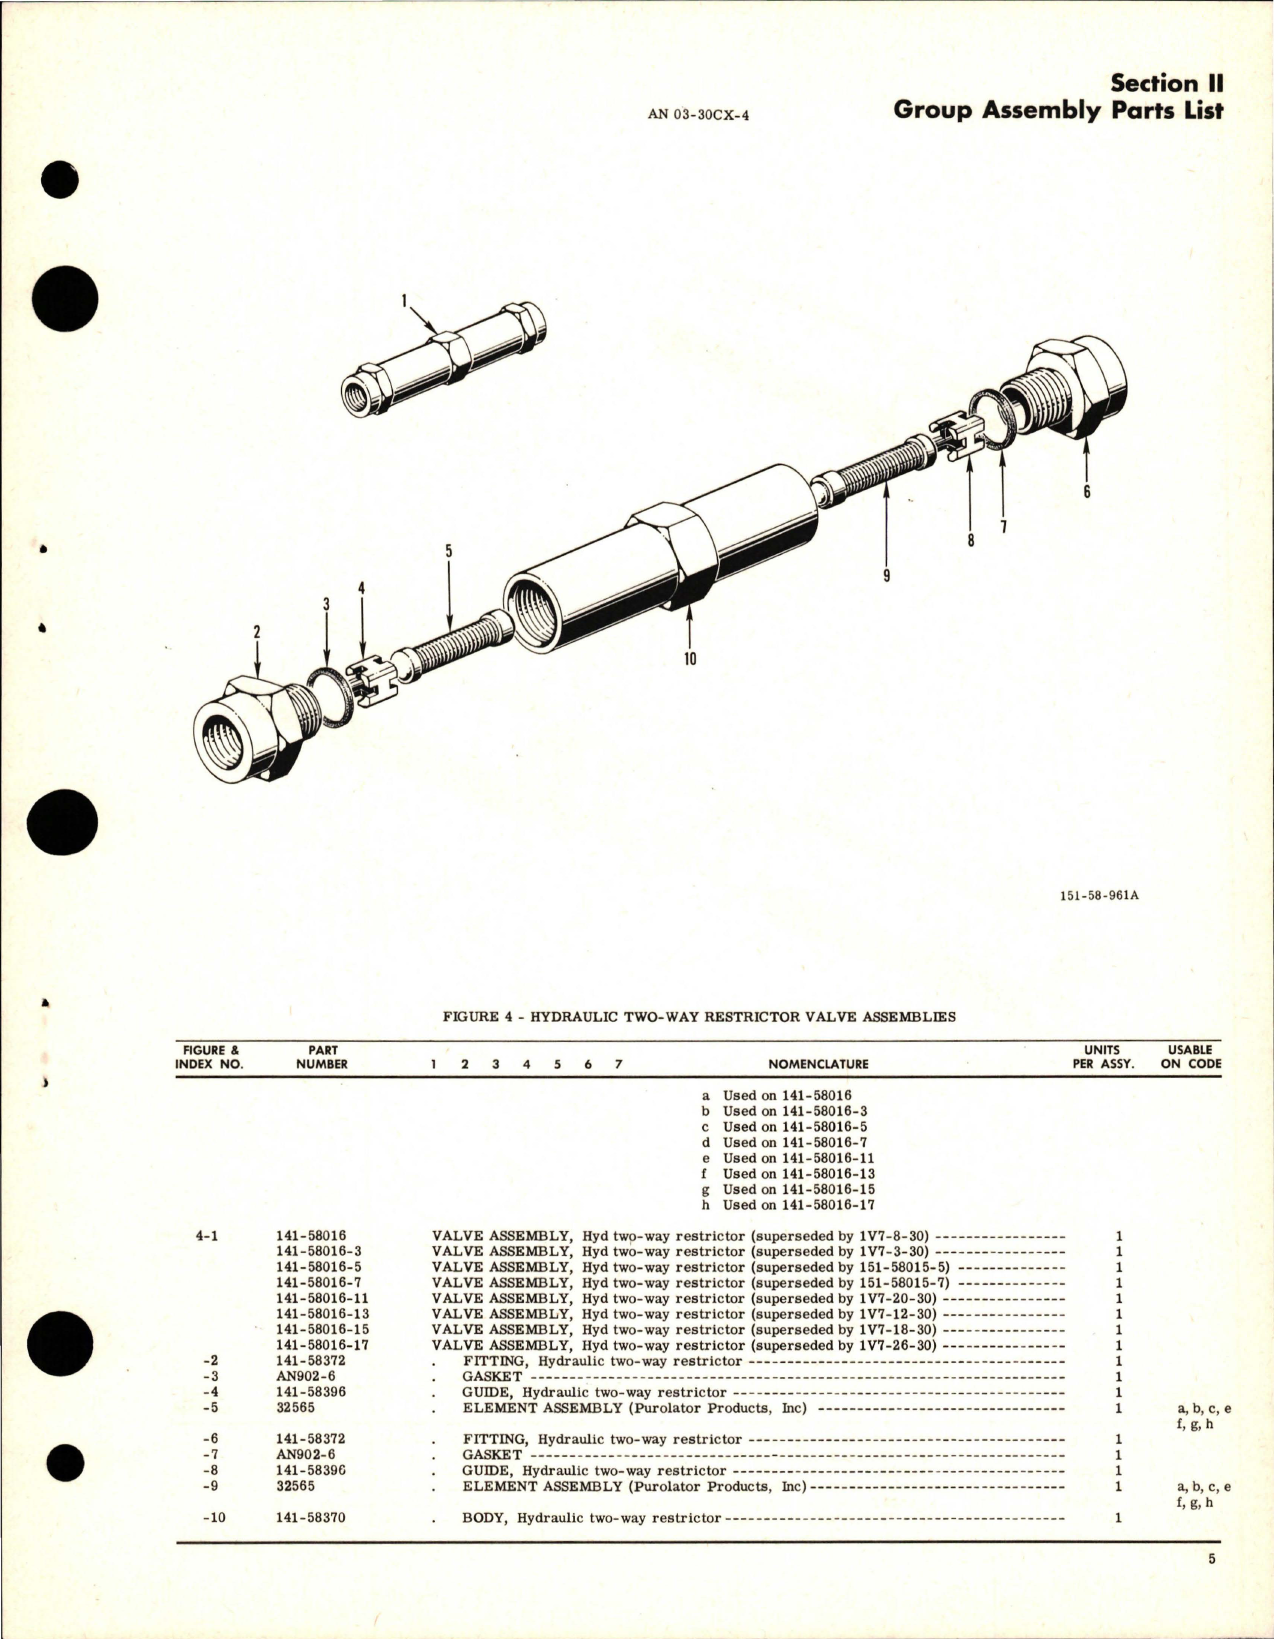 Sample page 7 from AirCorps Library document: Illustrated Parts Breakdown for Hydraulic Valves and Dampeners 